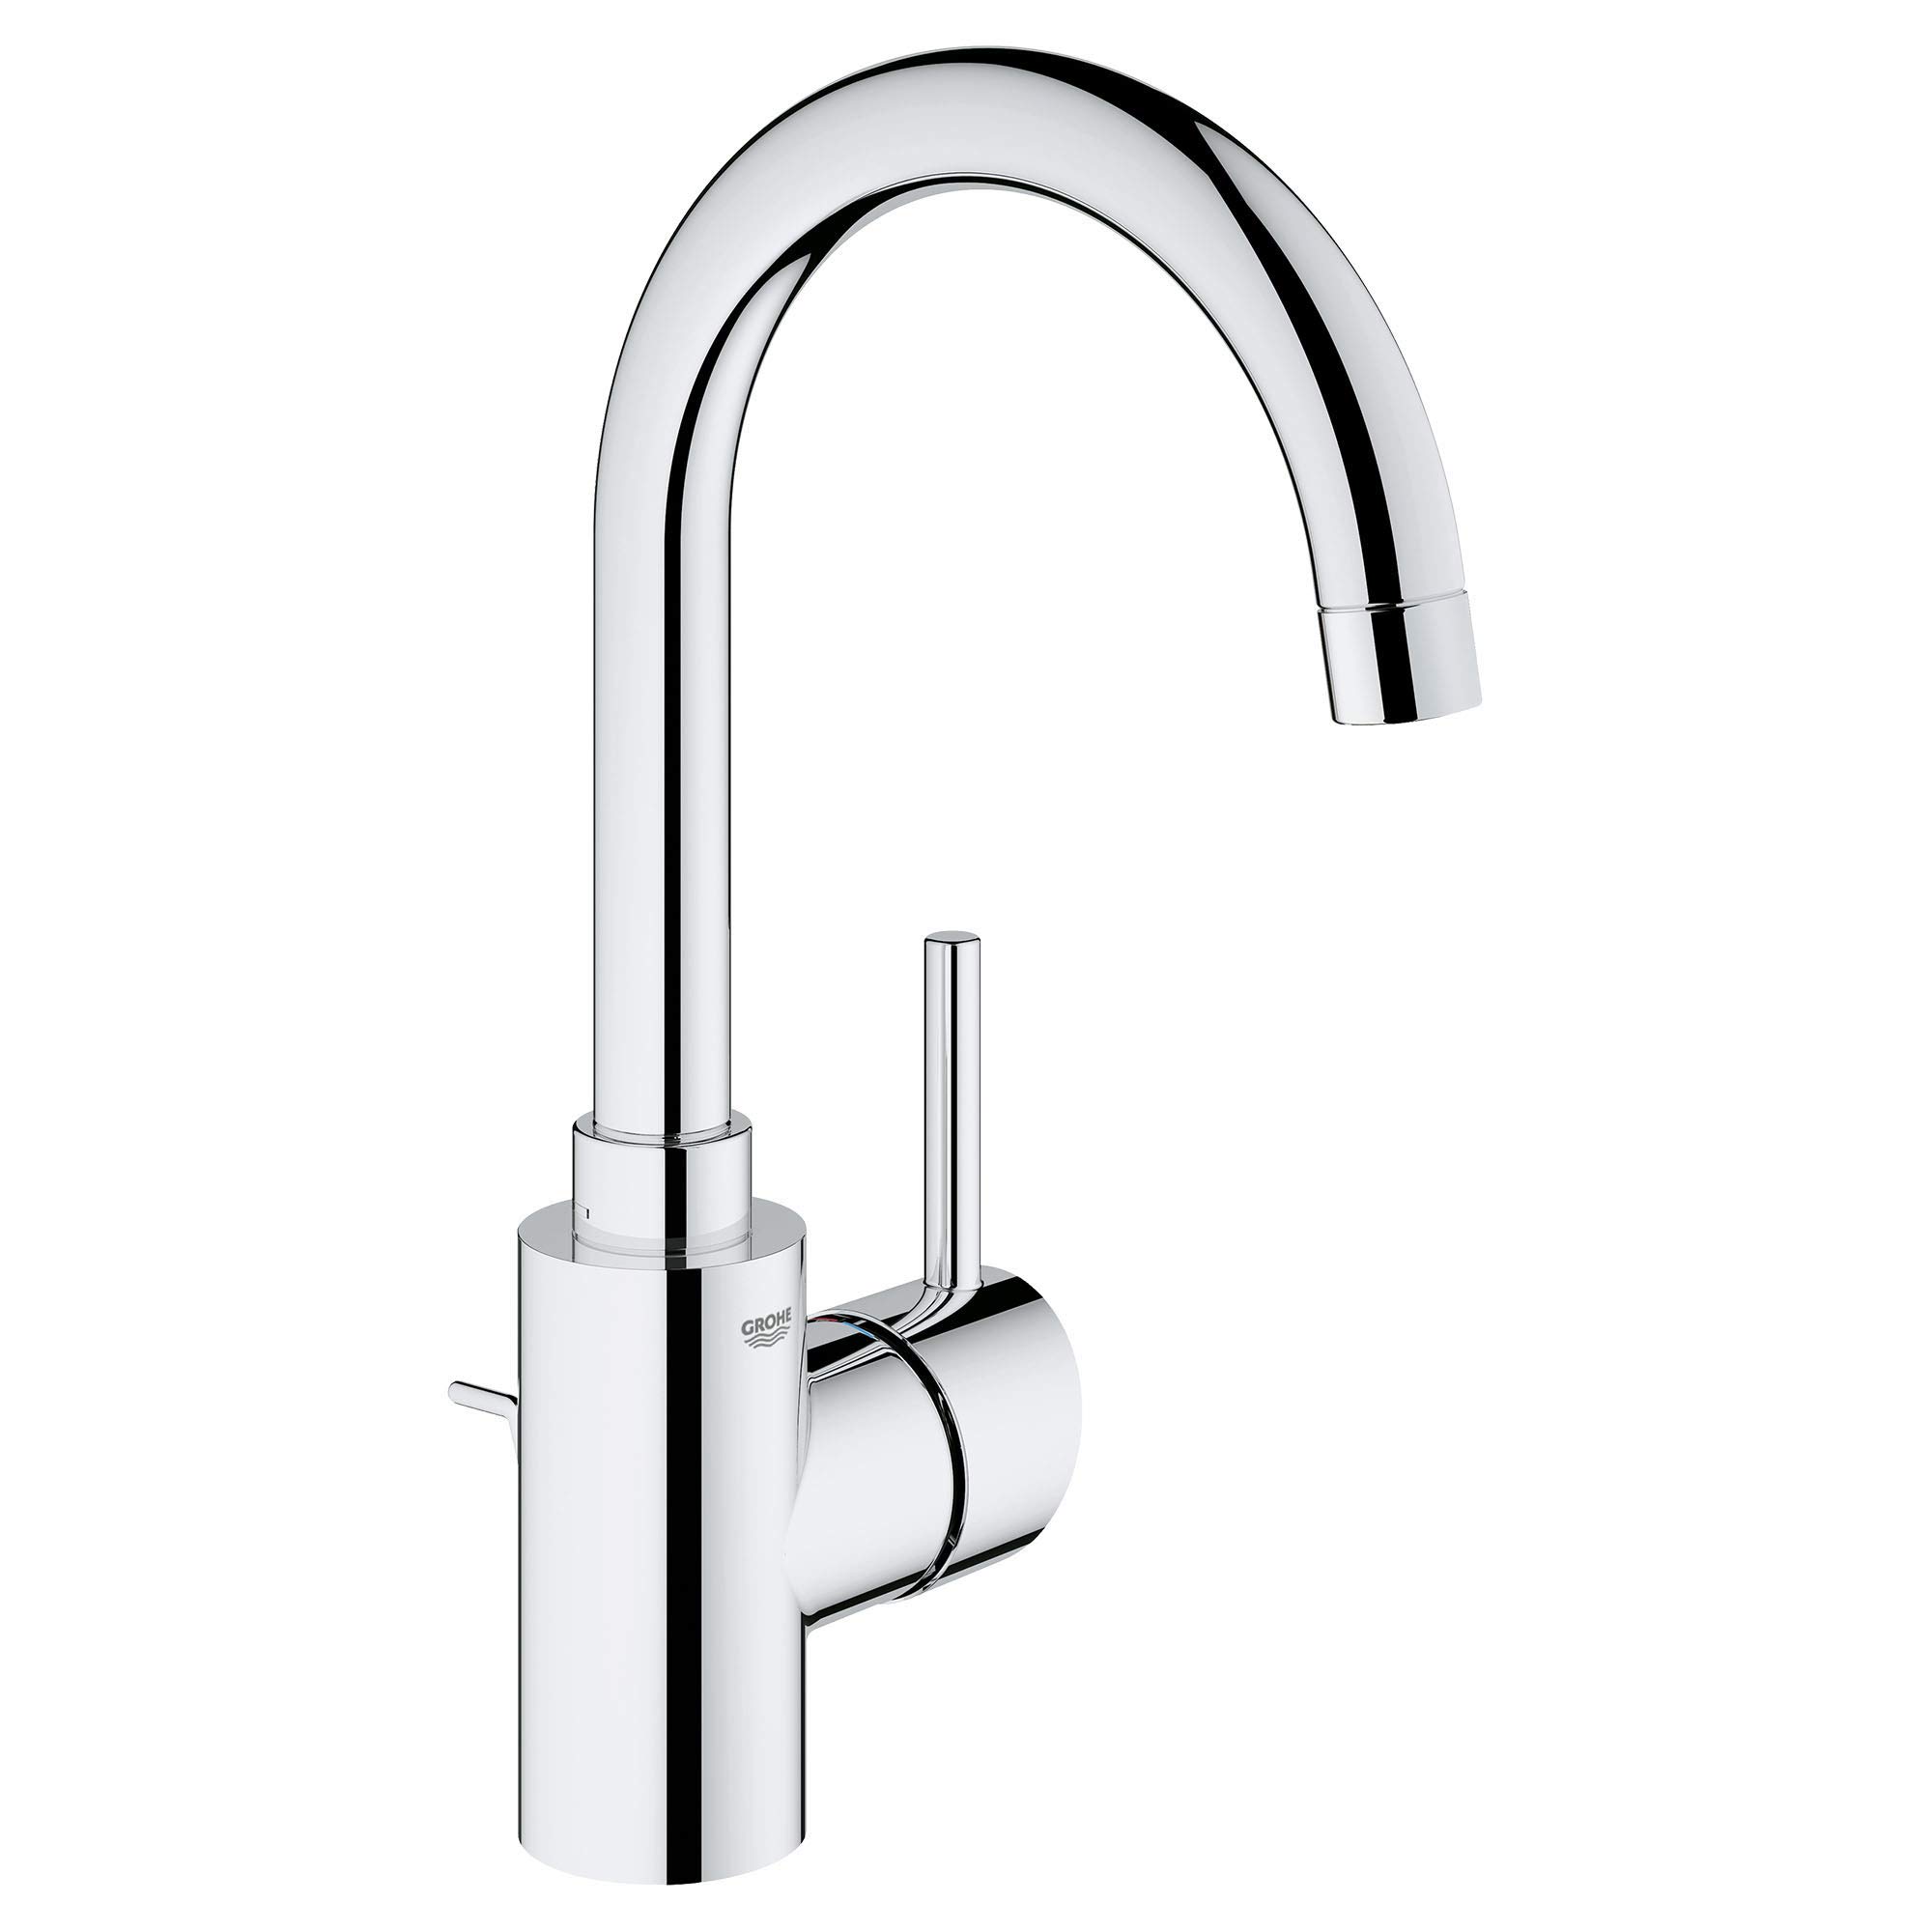 GROHE 32138002 Concetto Single-Handle Bathroom Sink Faucet, Brass, Starlight Chrome (1.2 GPM), Large